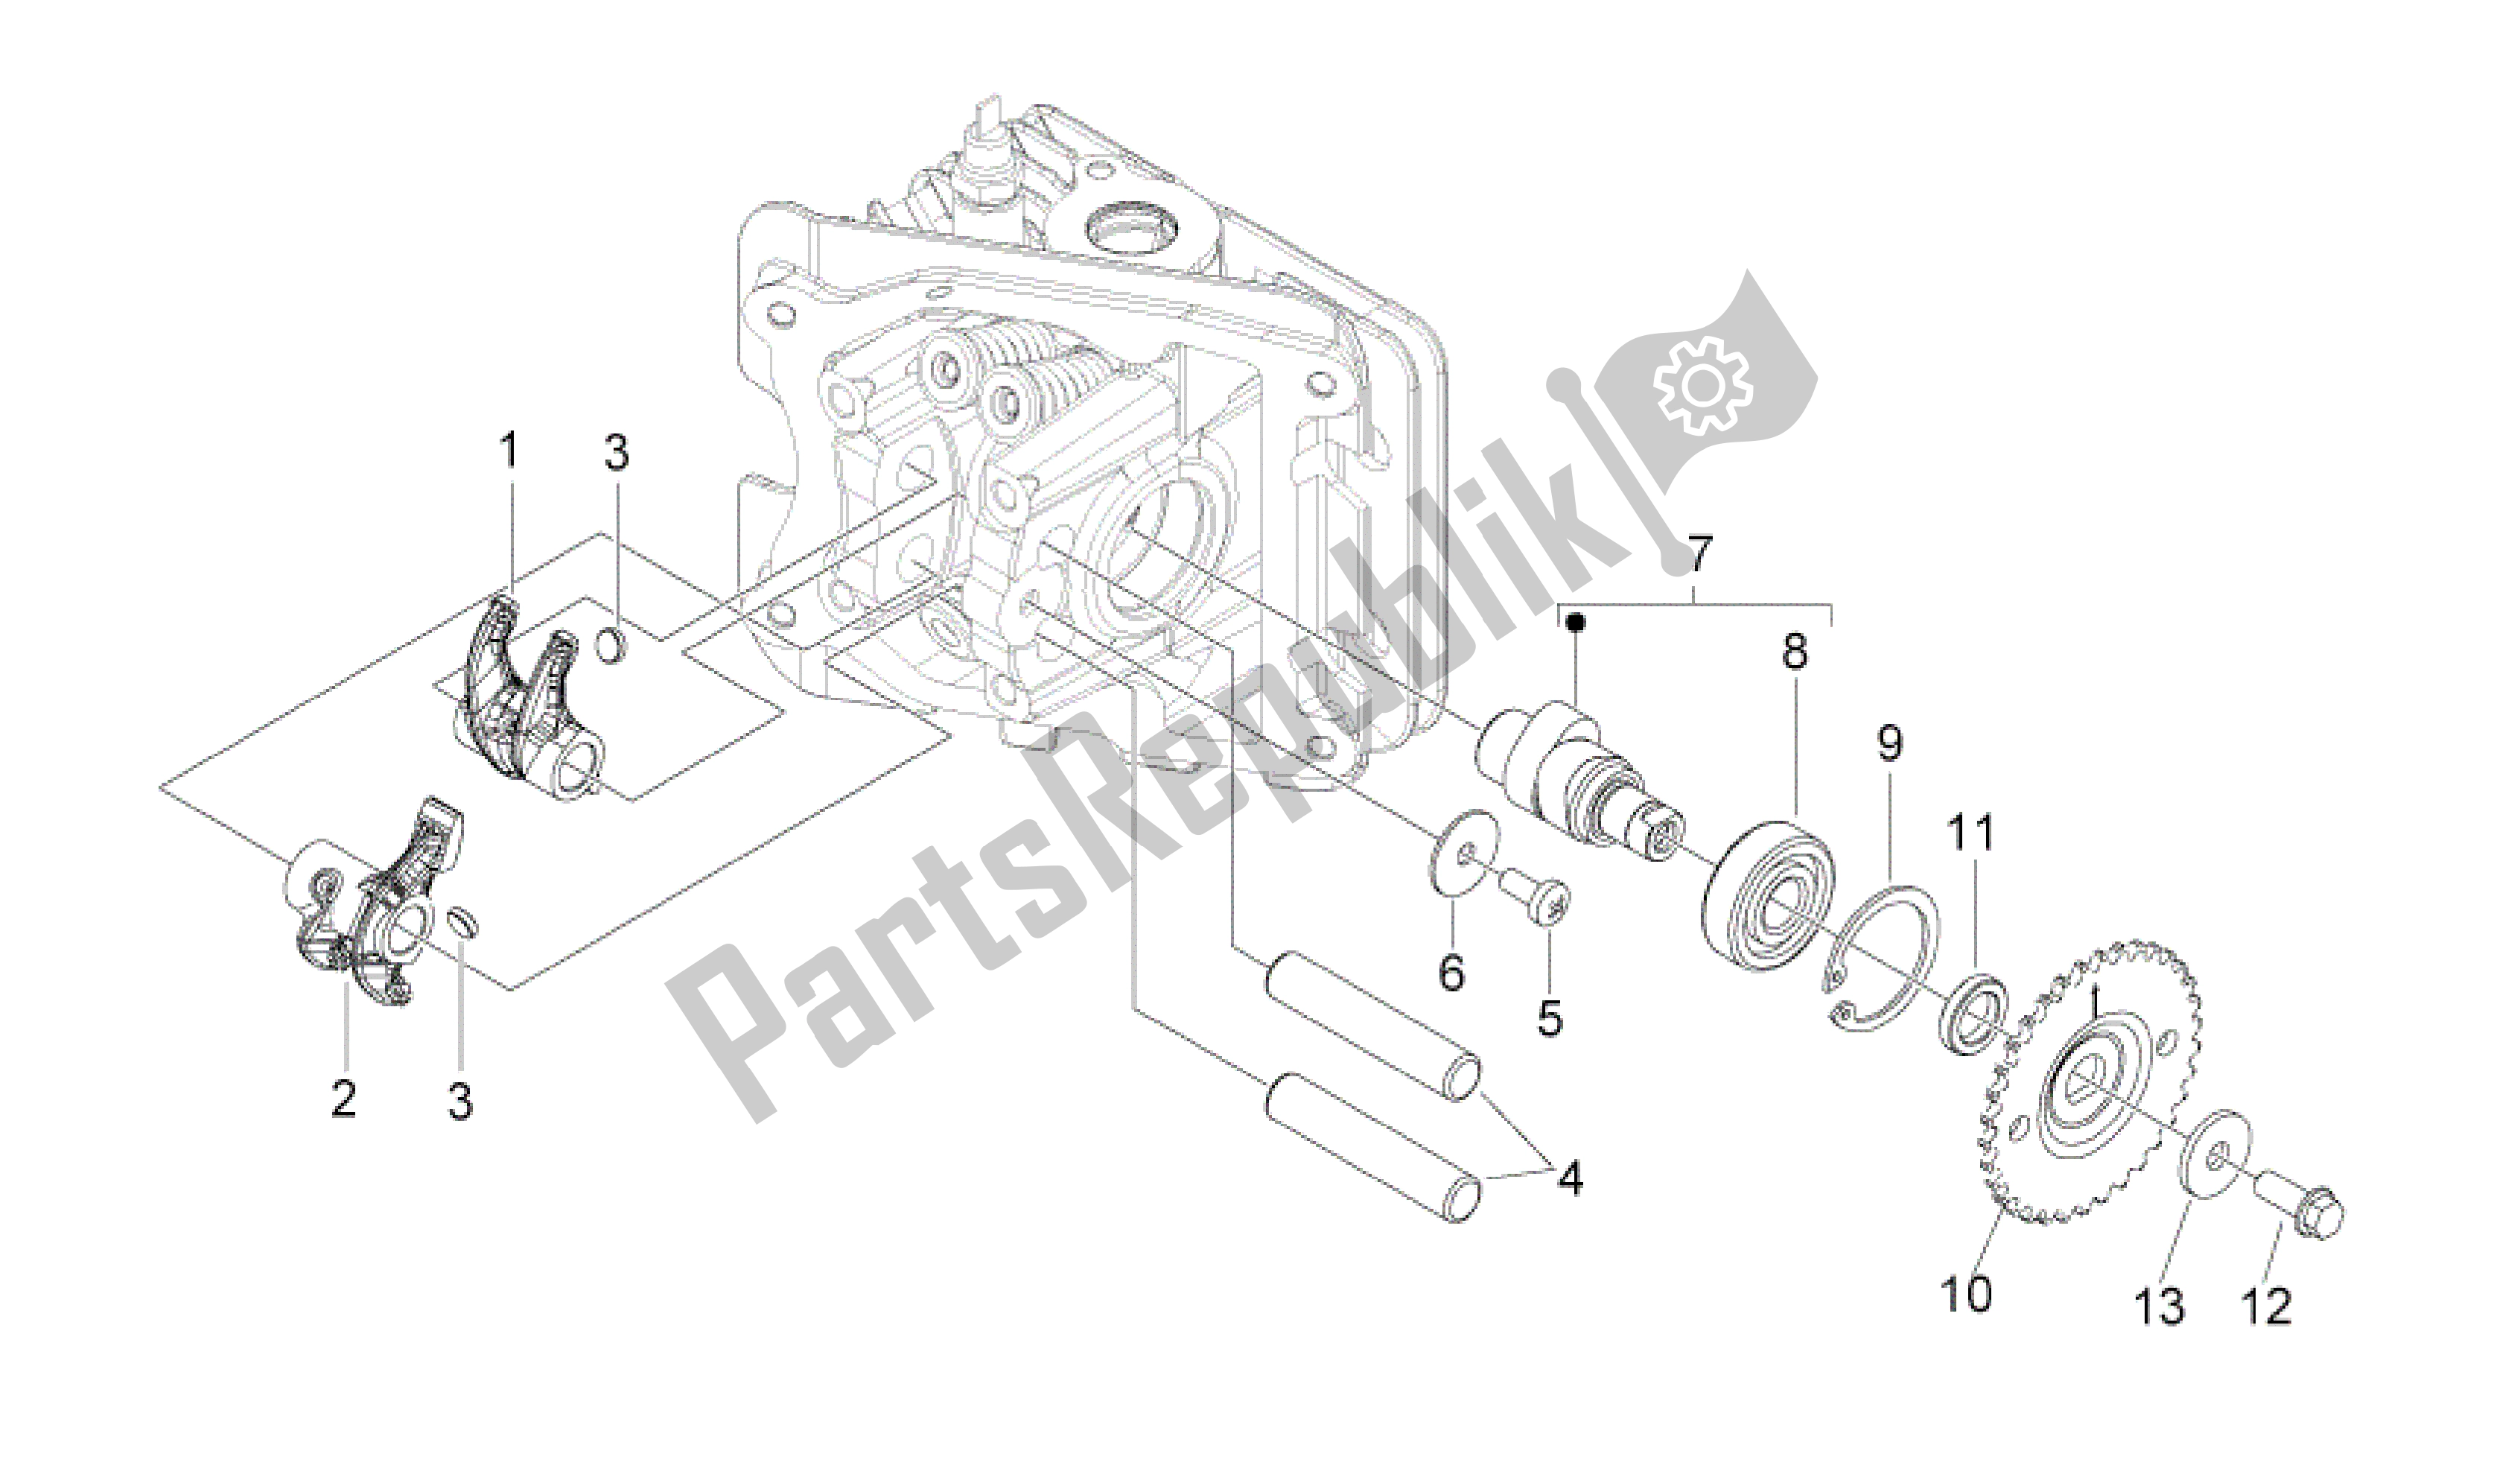 All parts for the Camshaft of the Aprilia Sport City 50 2011